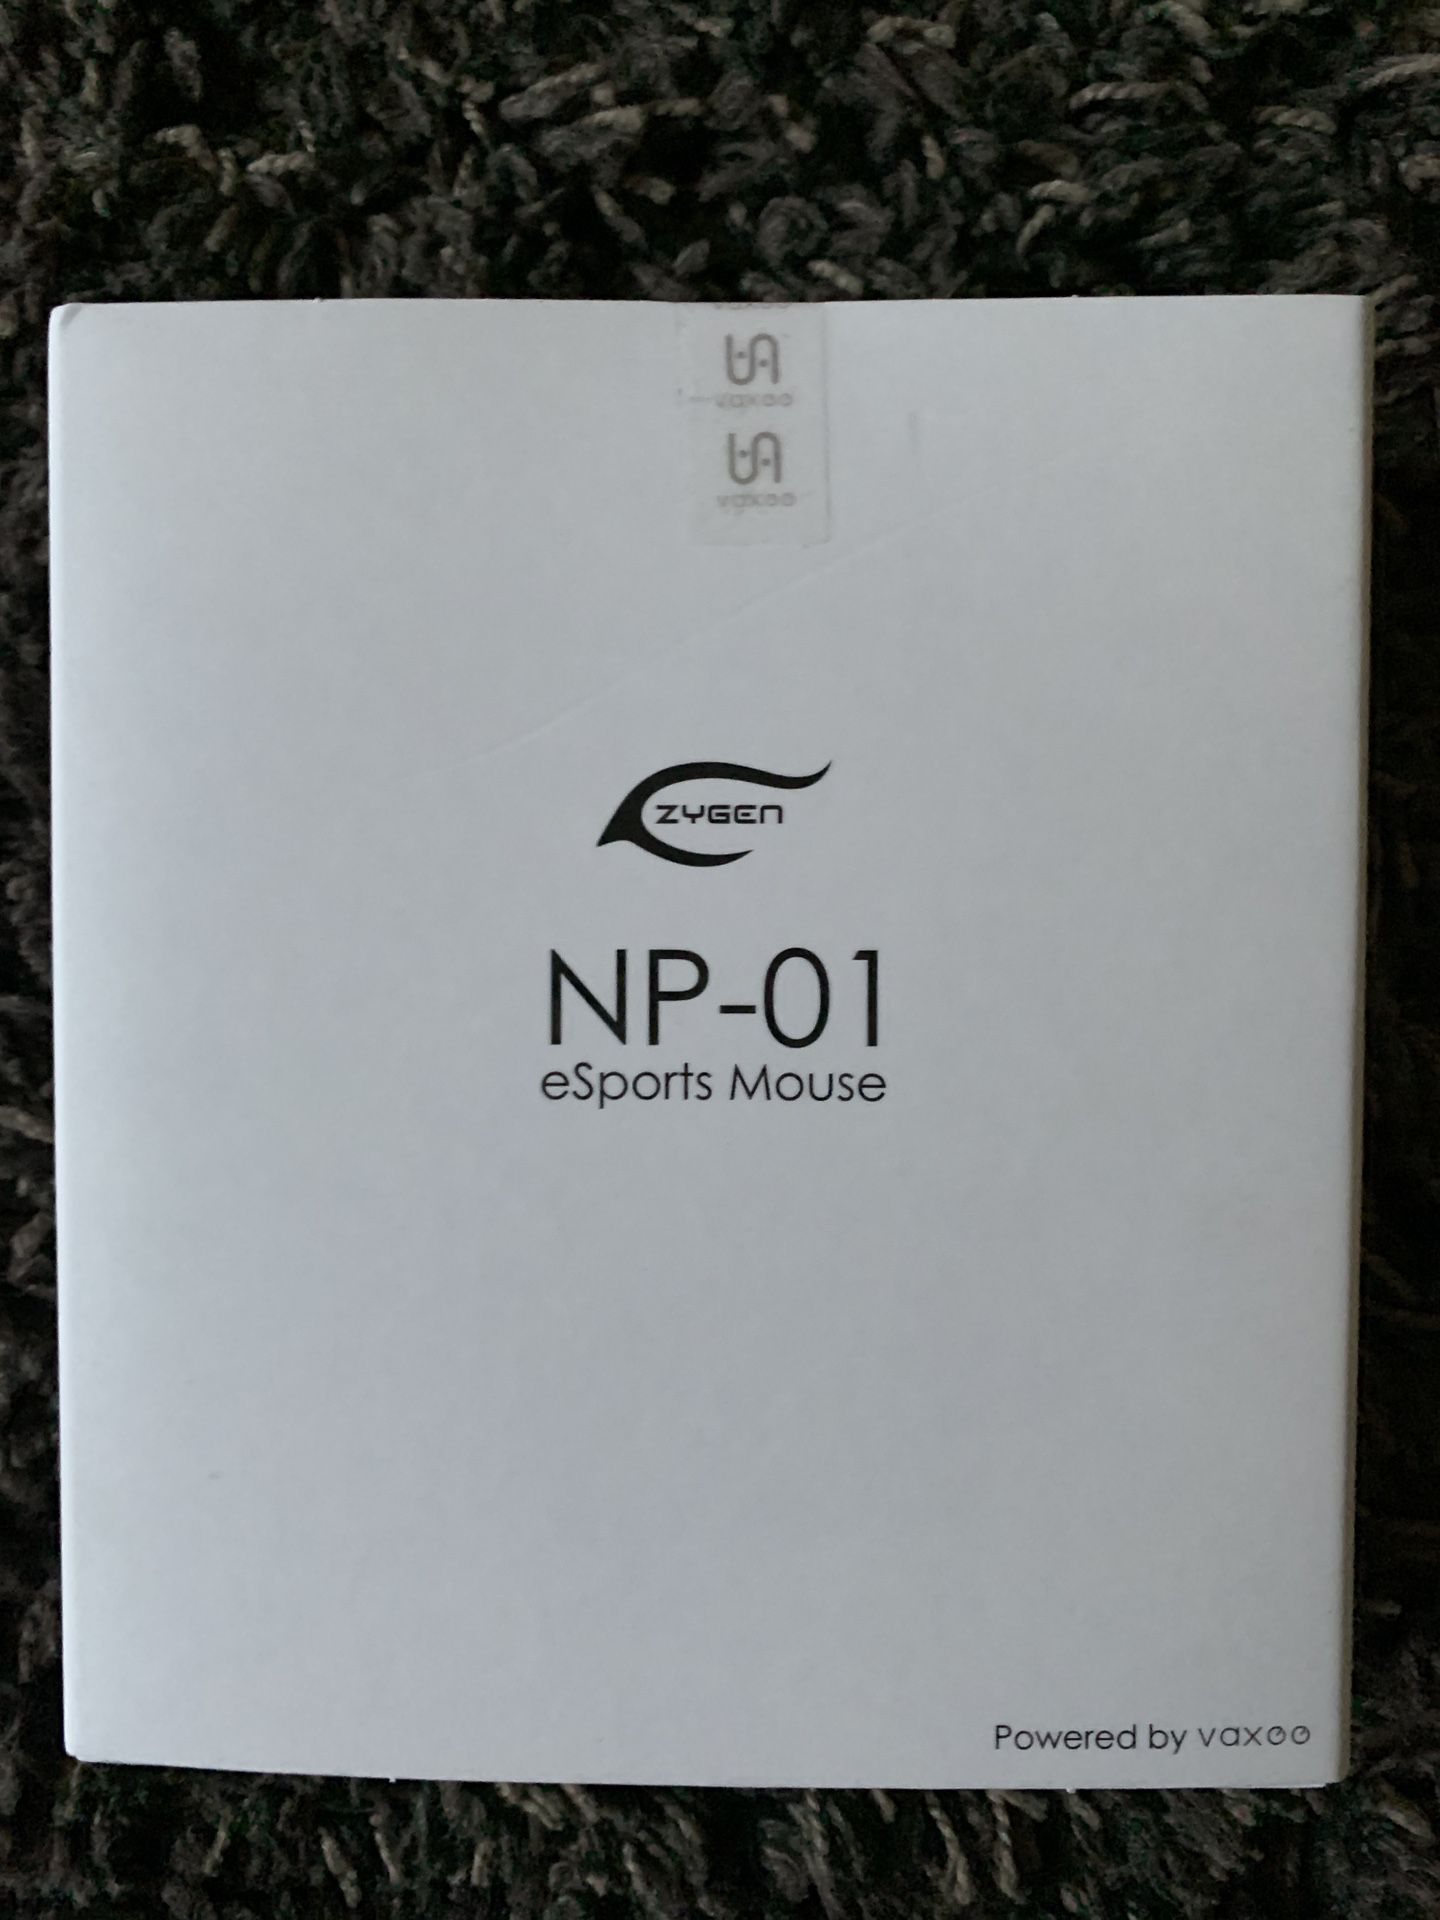 Vaxee Zygen NP-01 eSports Mouse